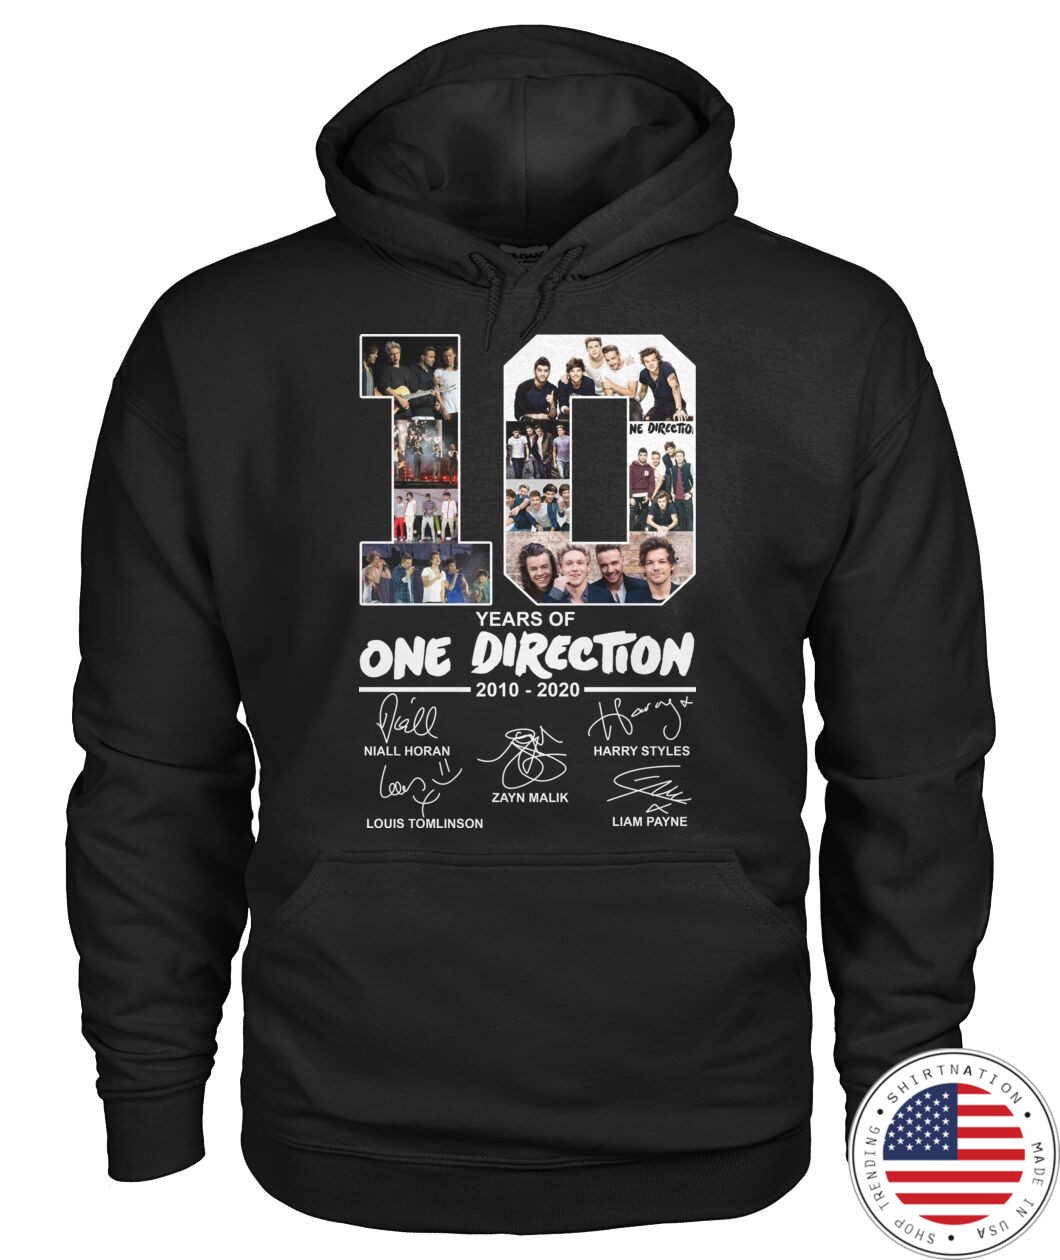 10 year of One Direction 2010 2020 shirt